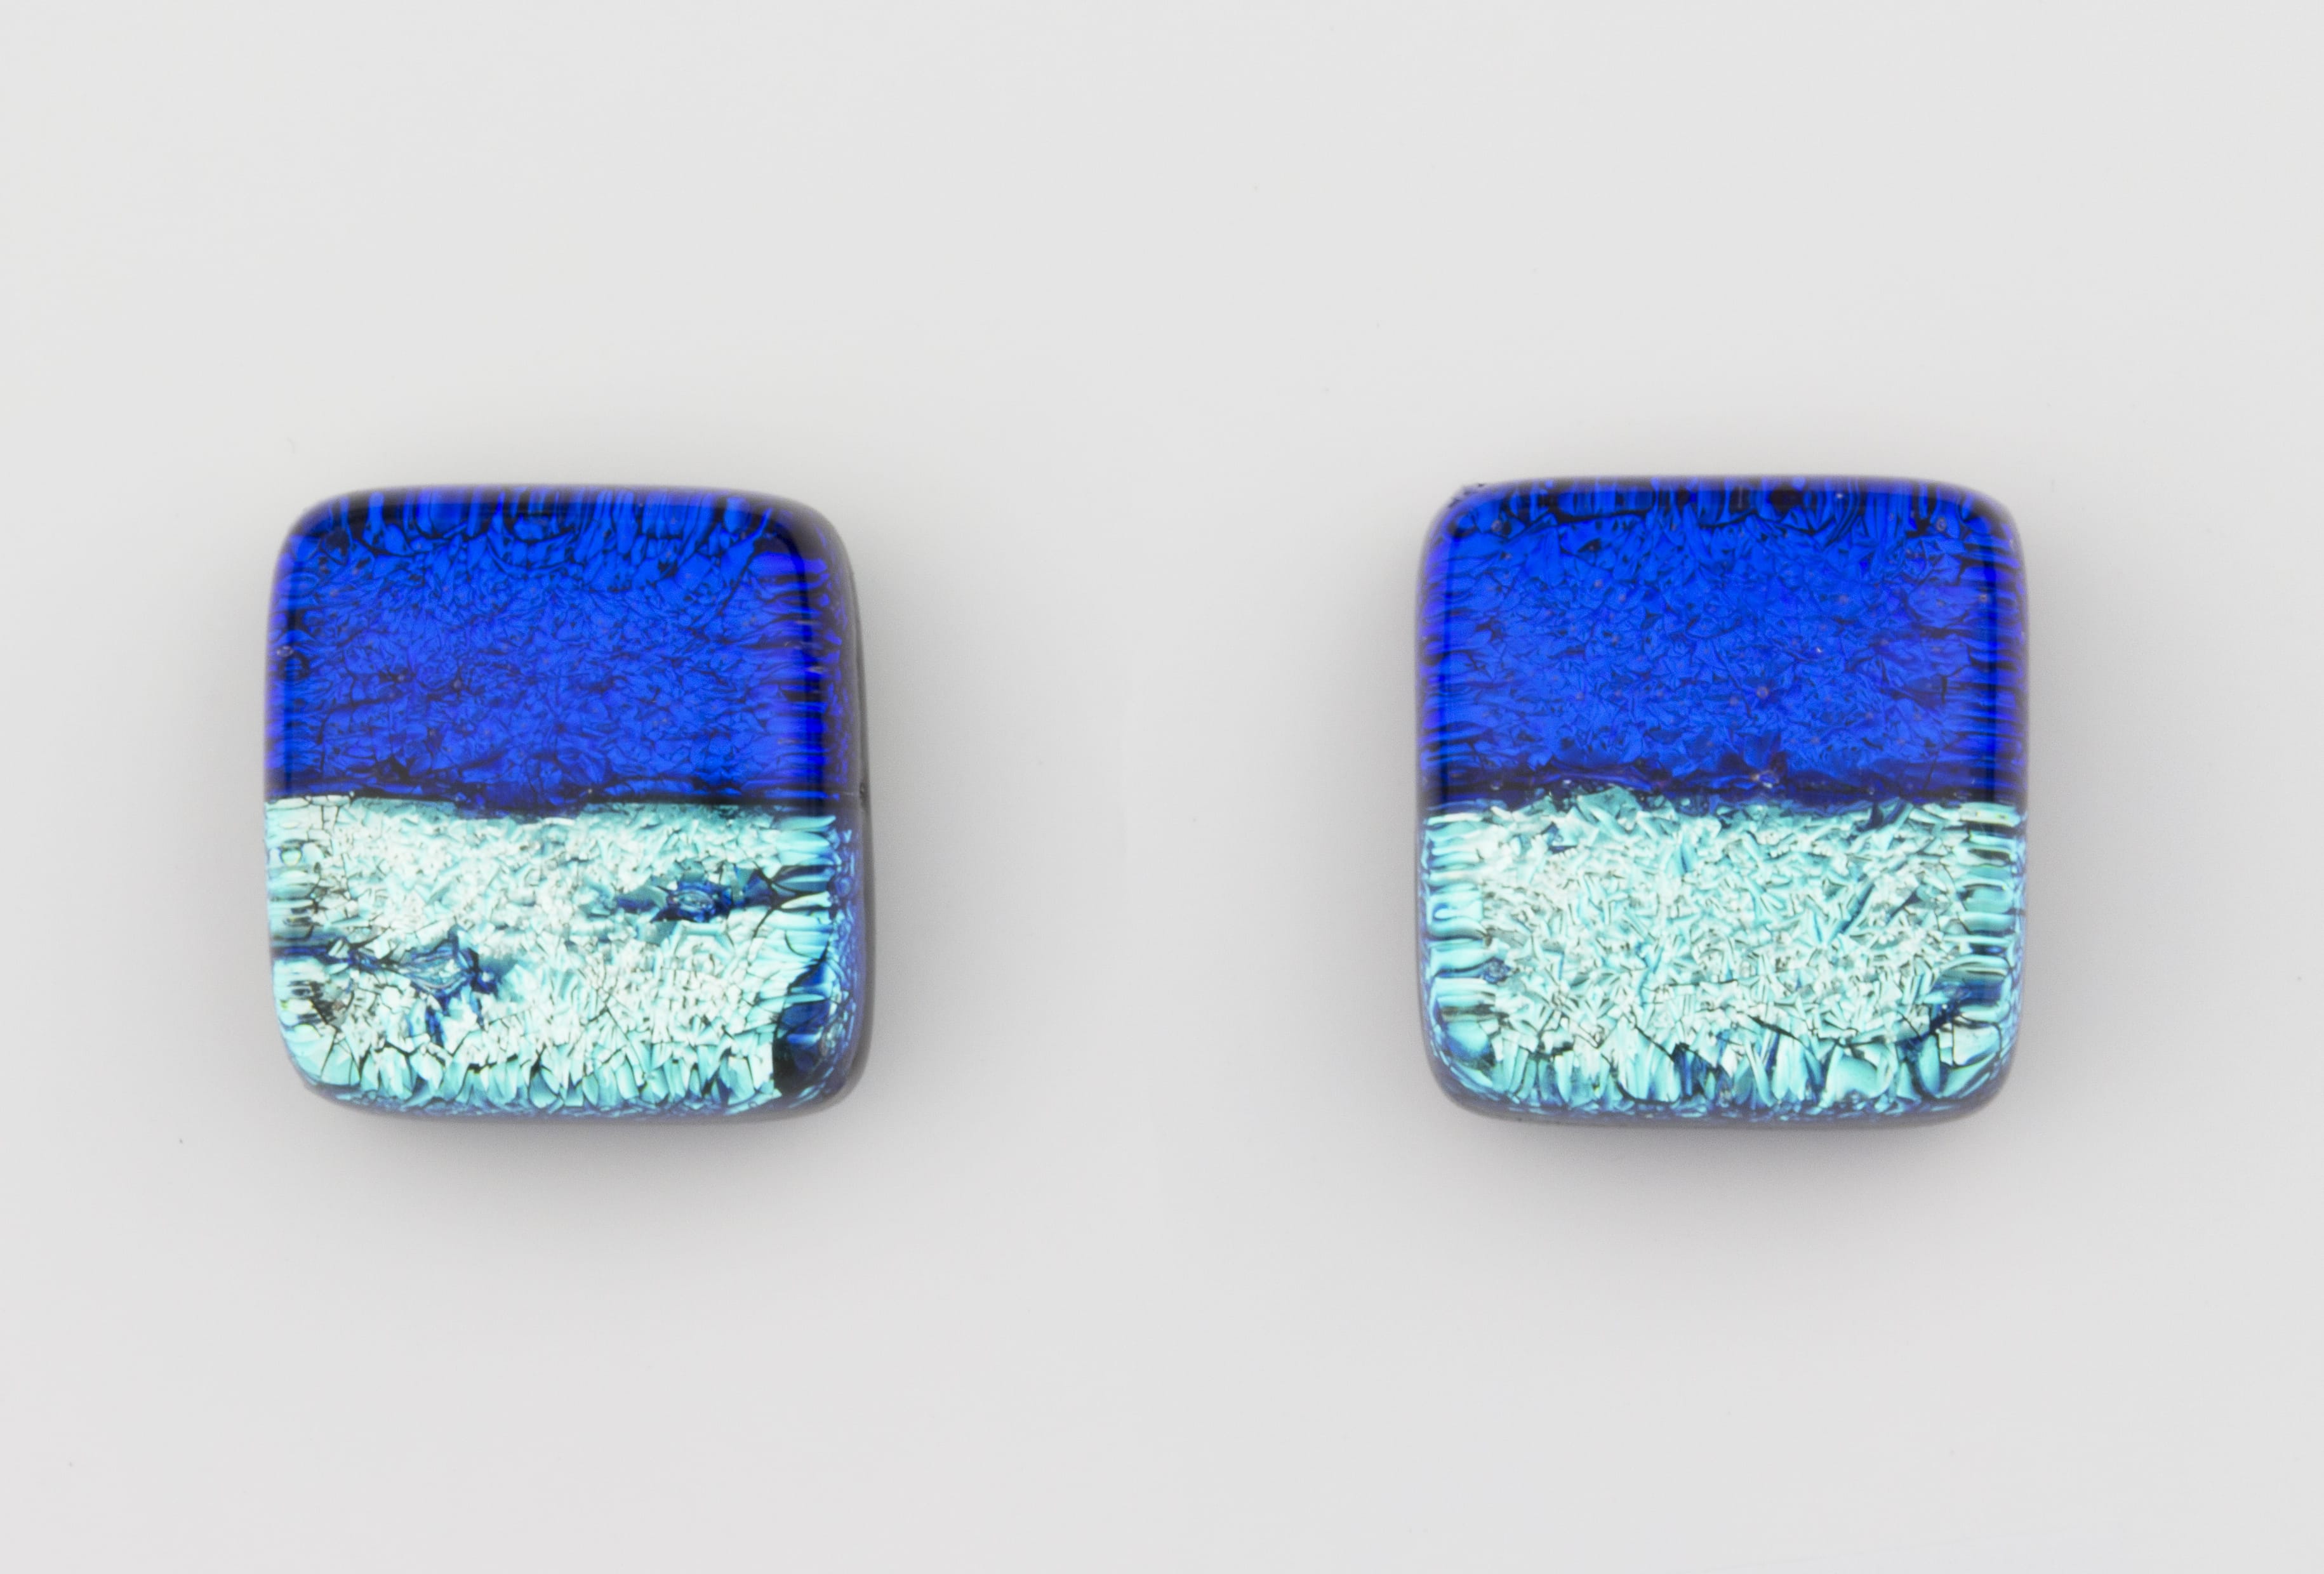 Dichroic glass jewellery uk, Handmade stud Earrings 2 tone blue glass earrings with sterling silver posts, square, glass 8-10mm